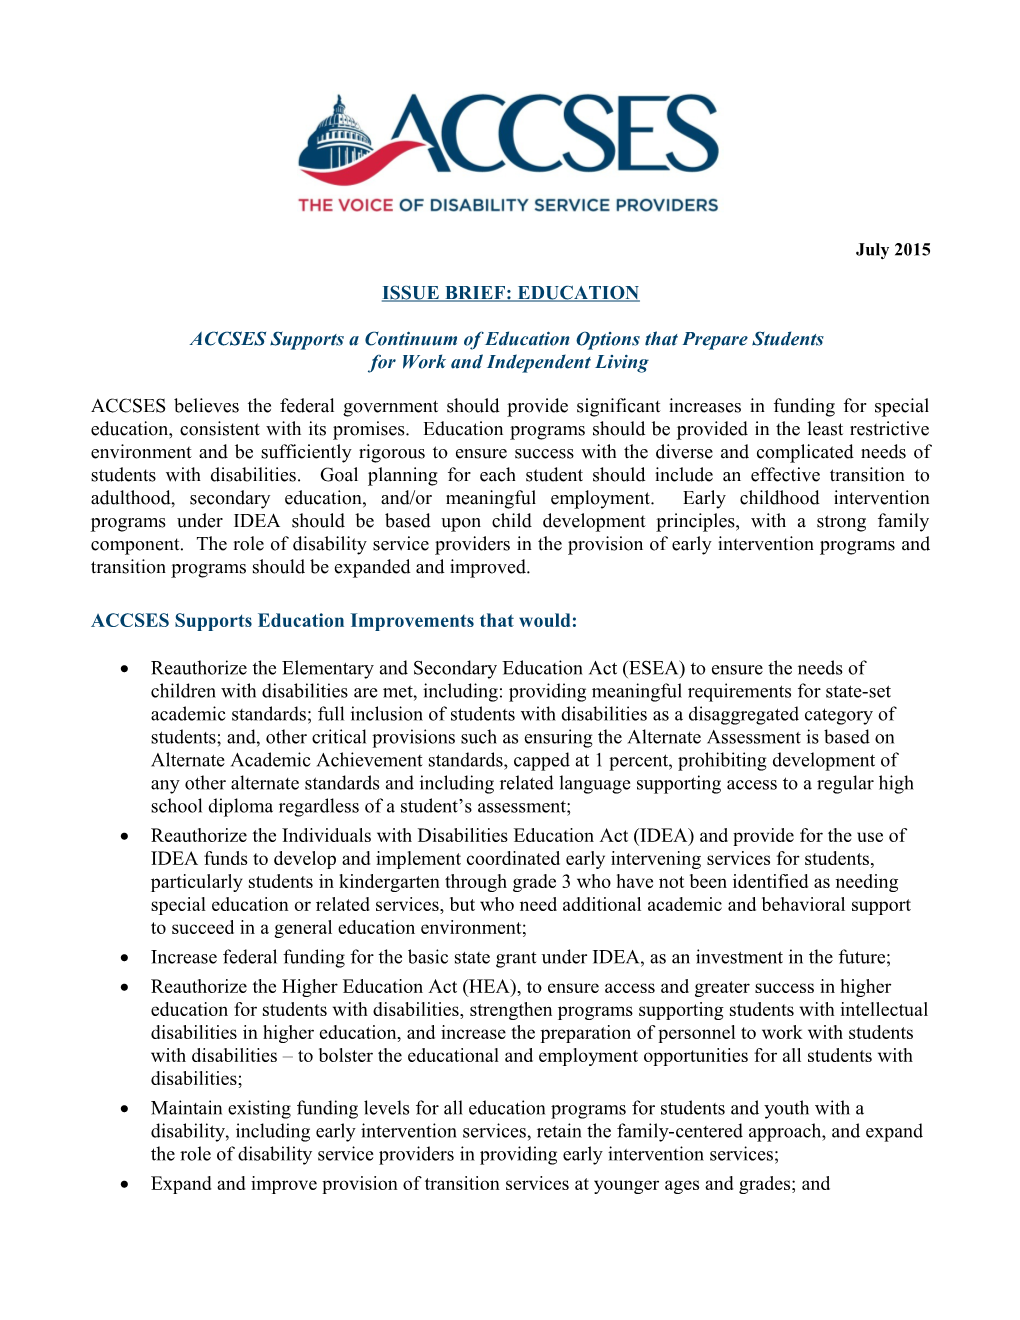 ACCSES Education One-Pager for July 2014 (D0542690 Xaa4fd)